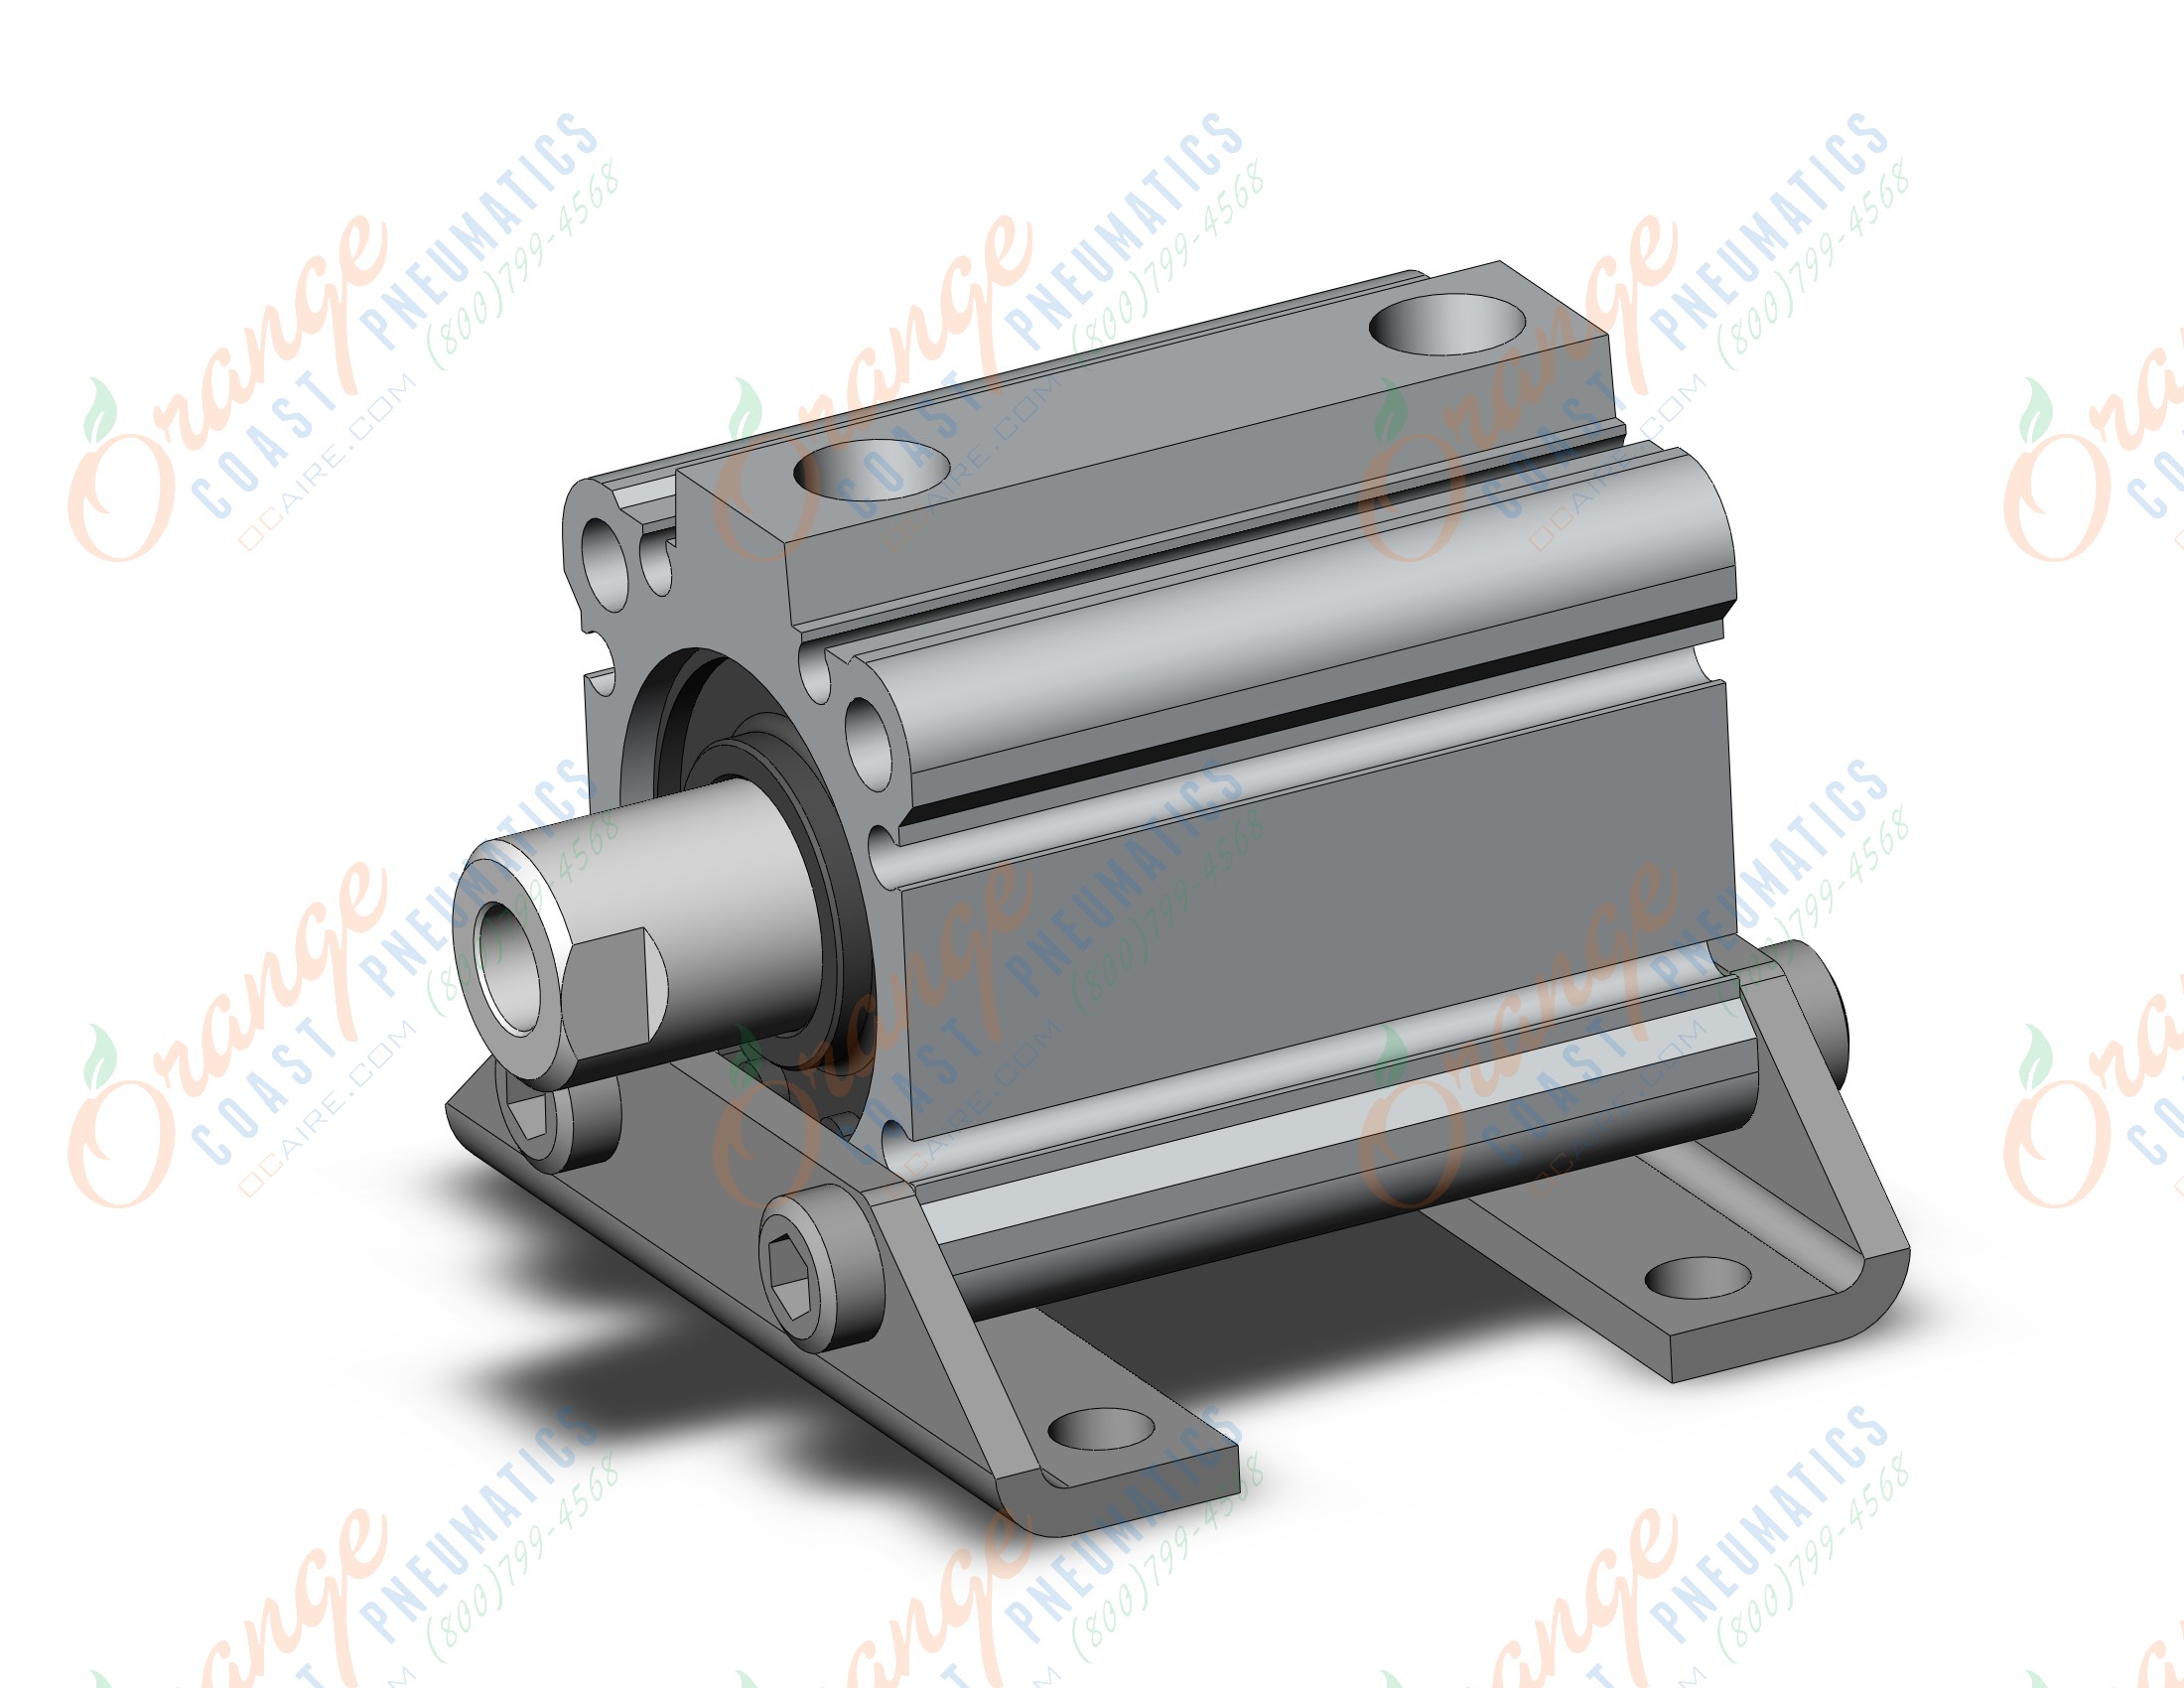 SMC CDQ2L32-25DCZ base cylinder, CQ2-Z COMPACT CYLINDER